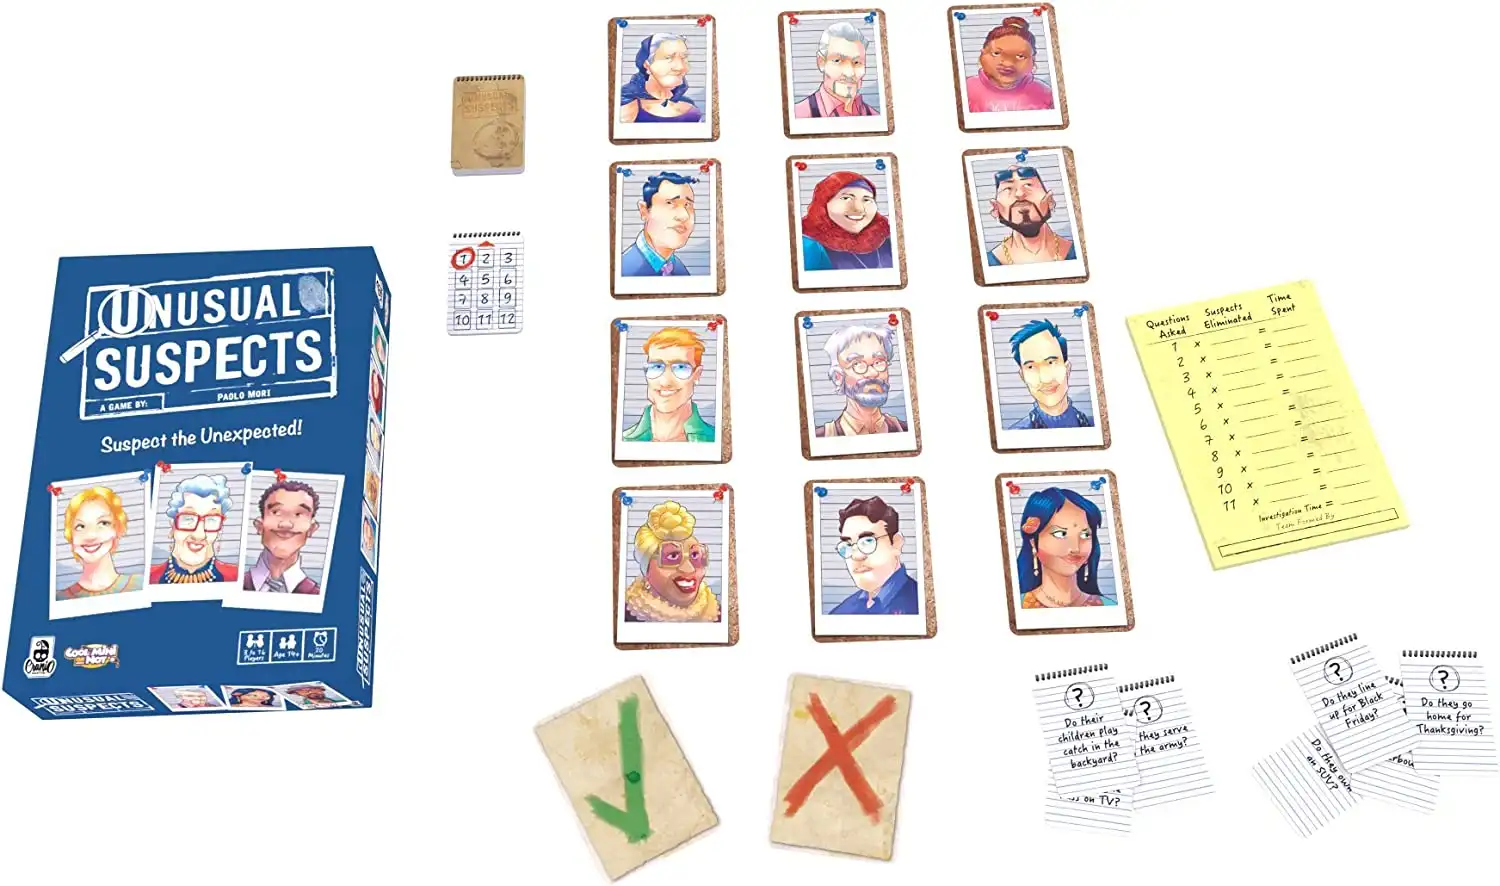 Unusual Suspects (2015) board game components | Source: CMON